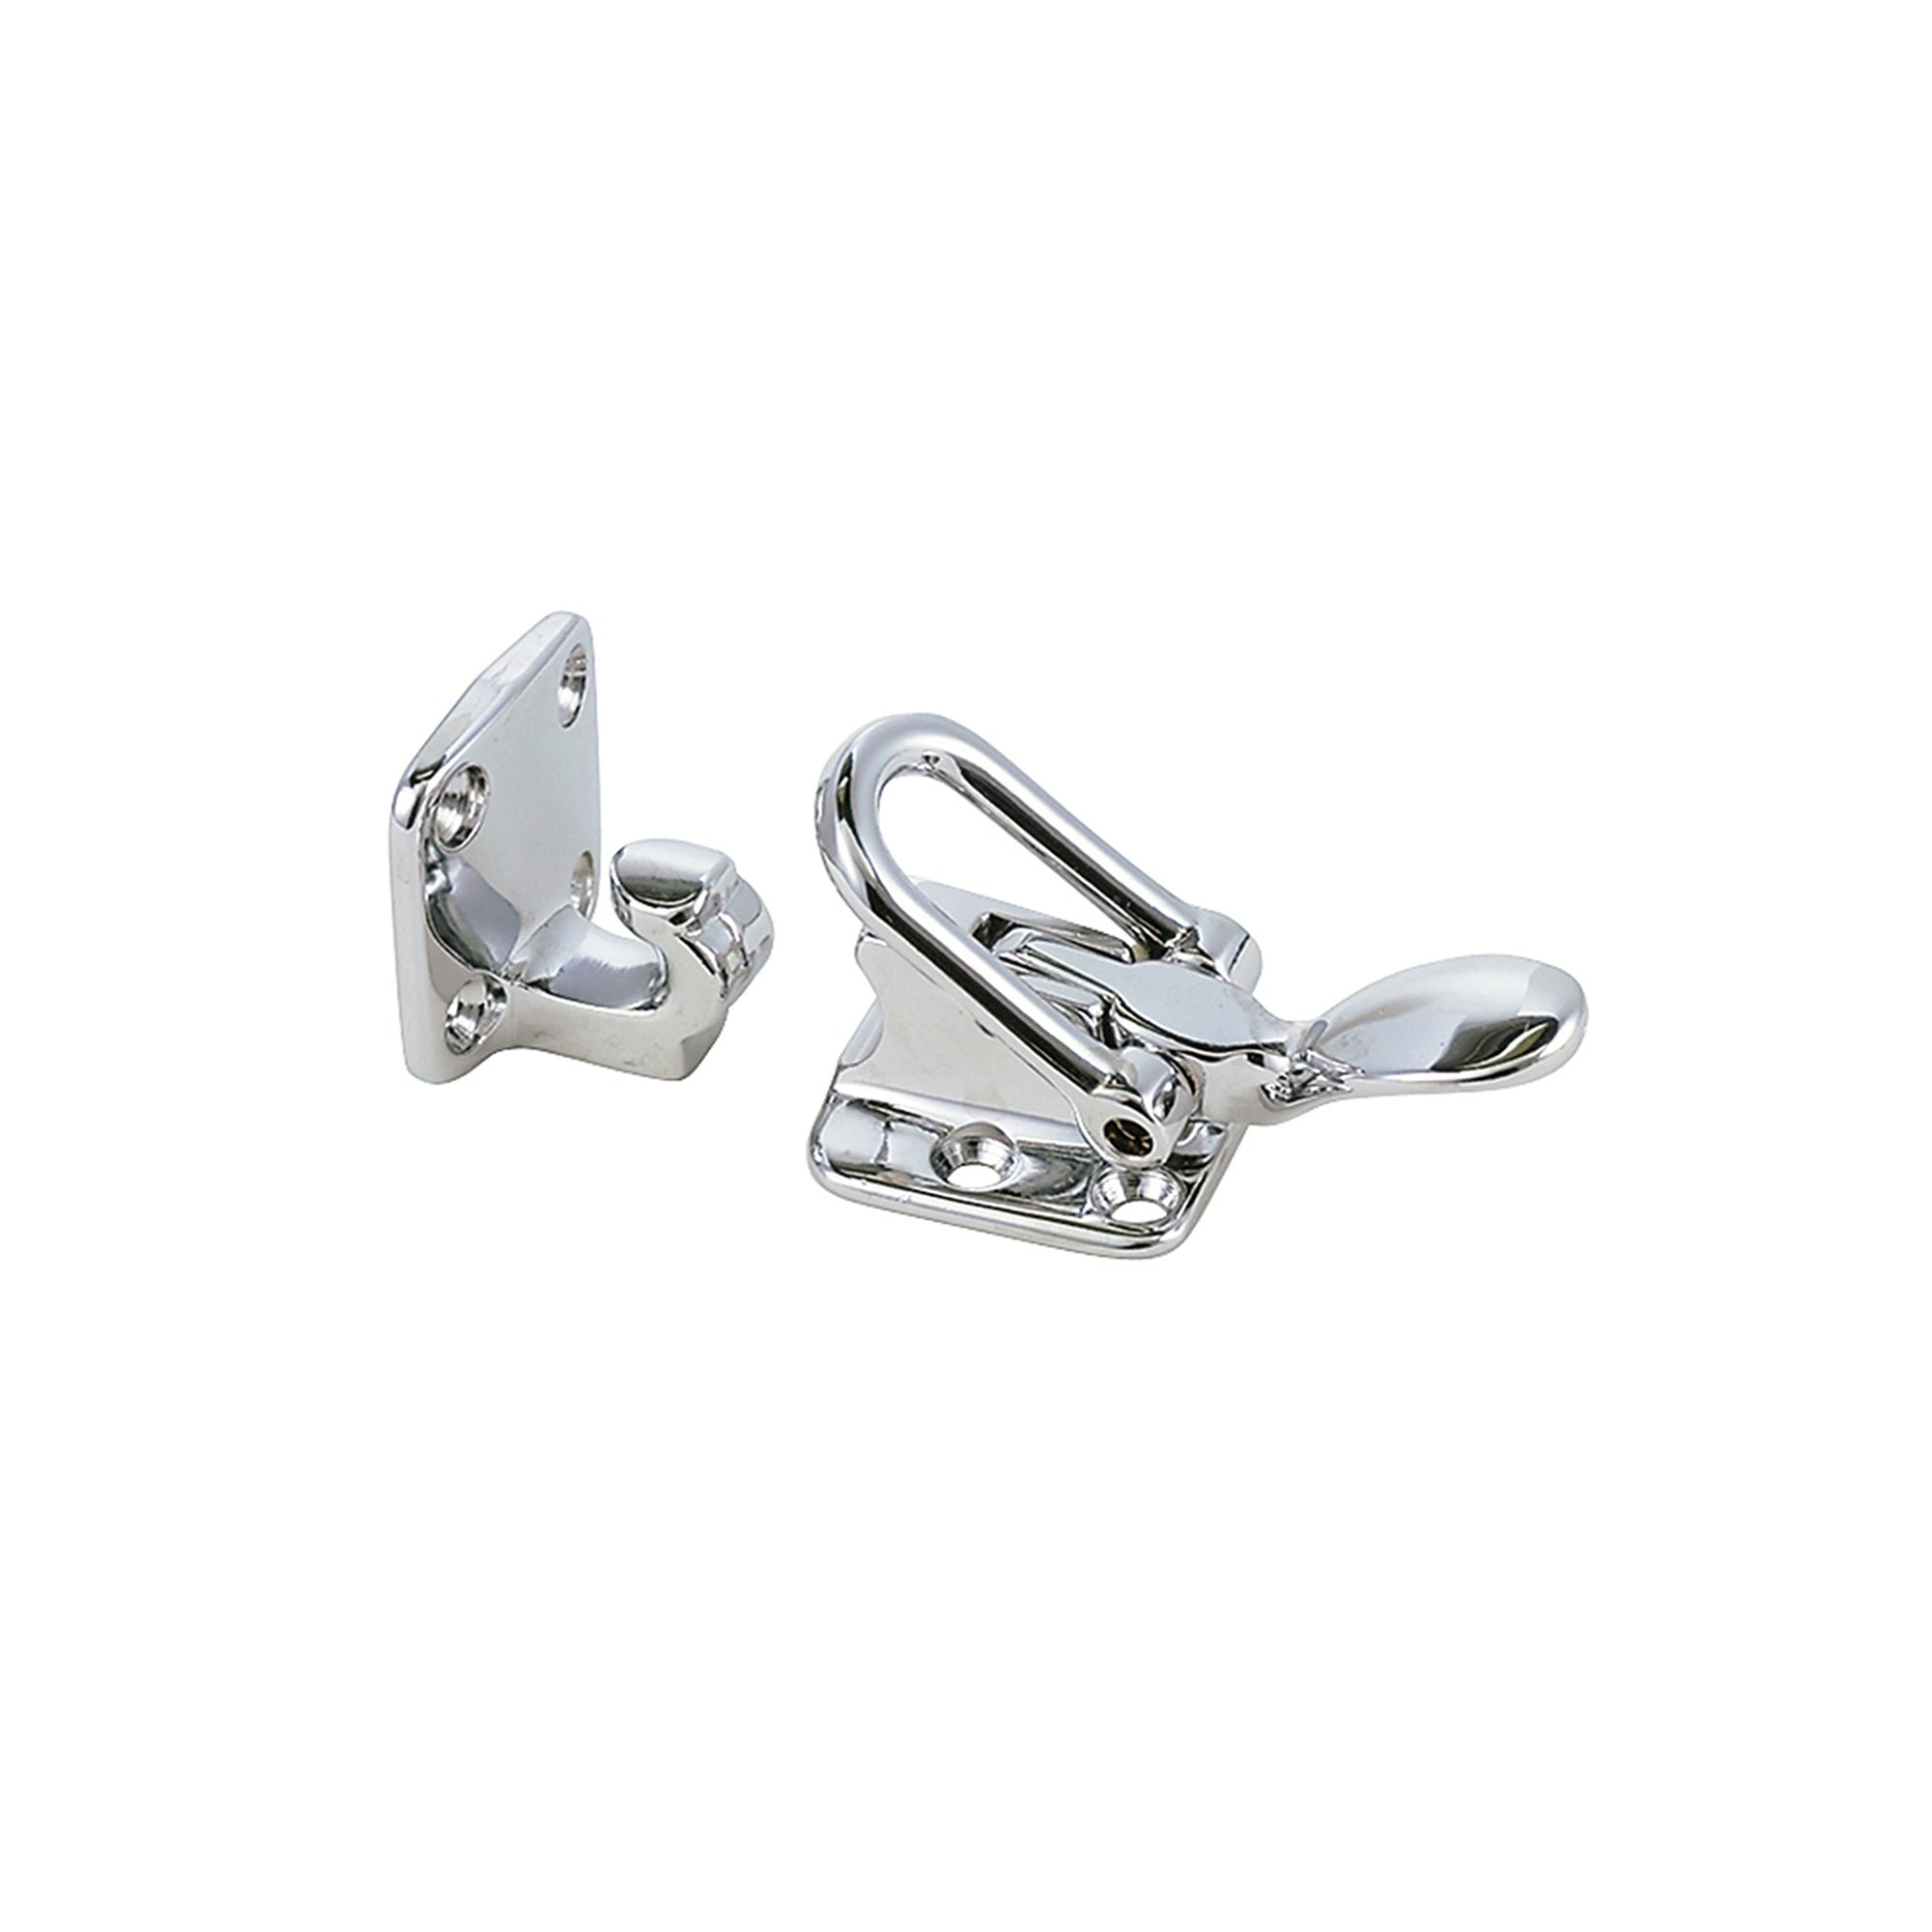 Perko 1113DP0CHR Chrome-Plated Right Angle Mounting Hold-Down Clamp - 2.5" x 1.5"